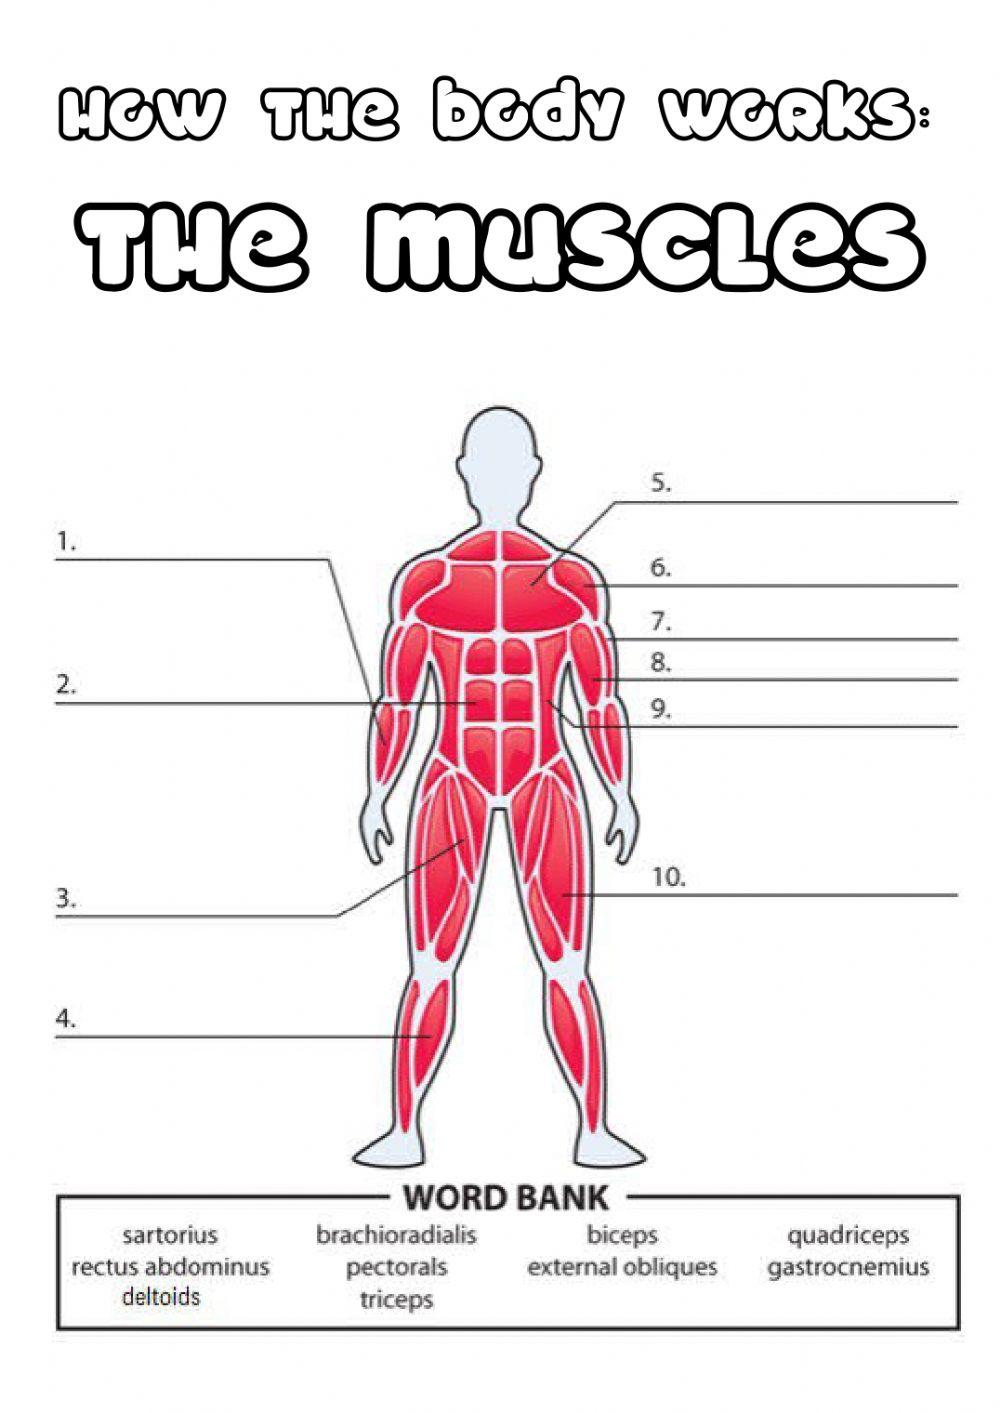 Y5 the muscles